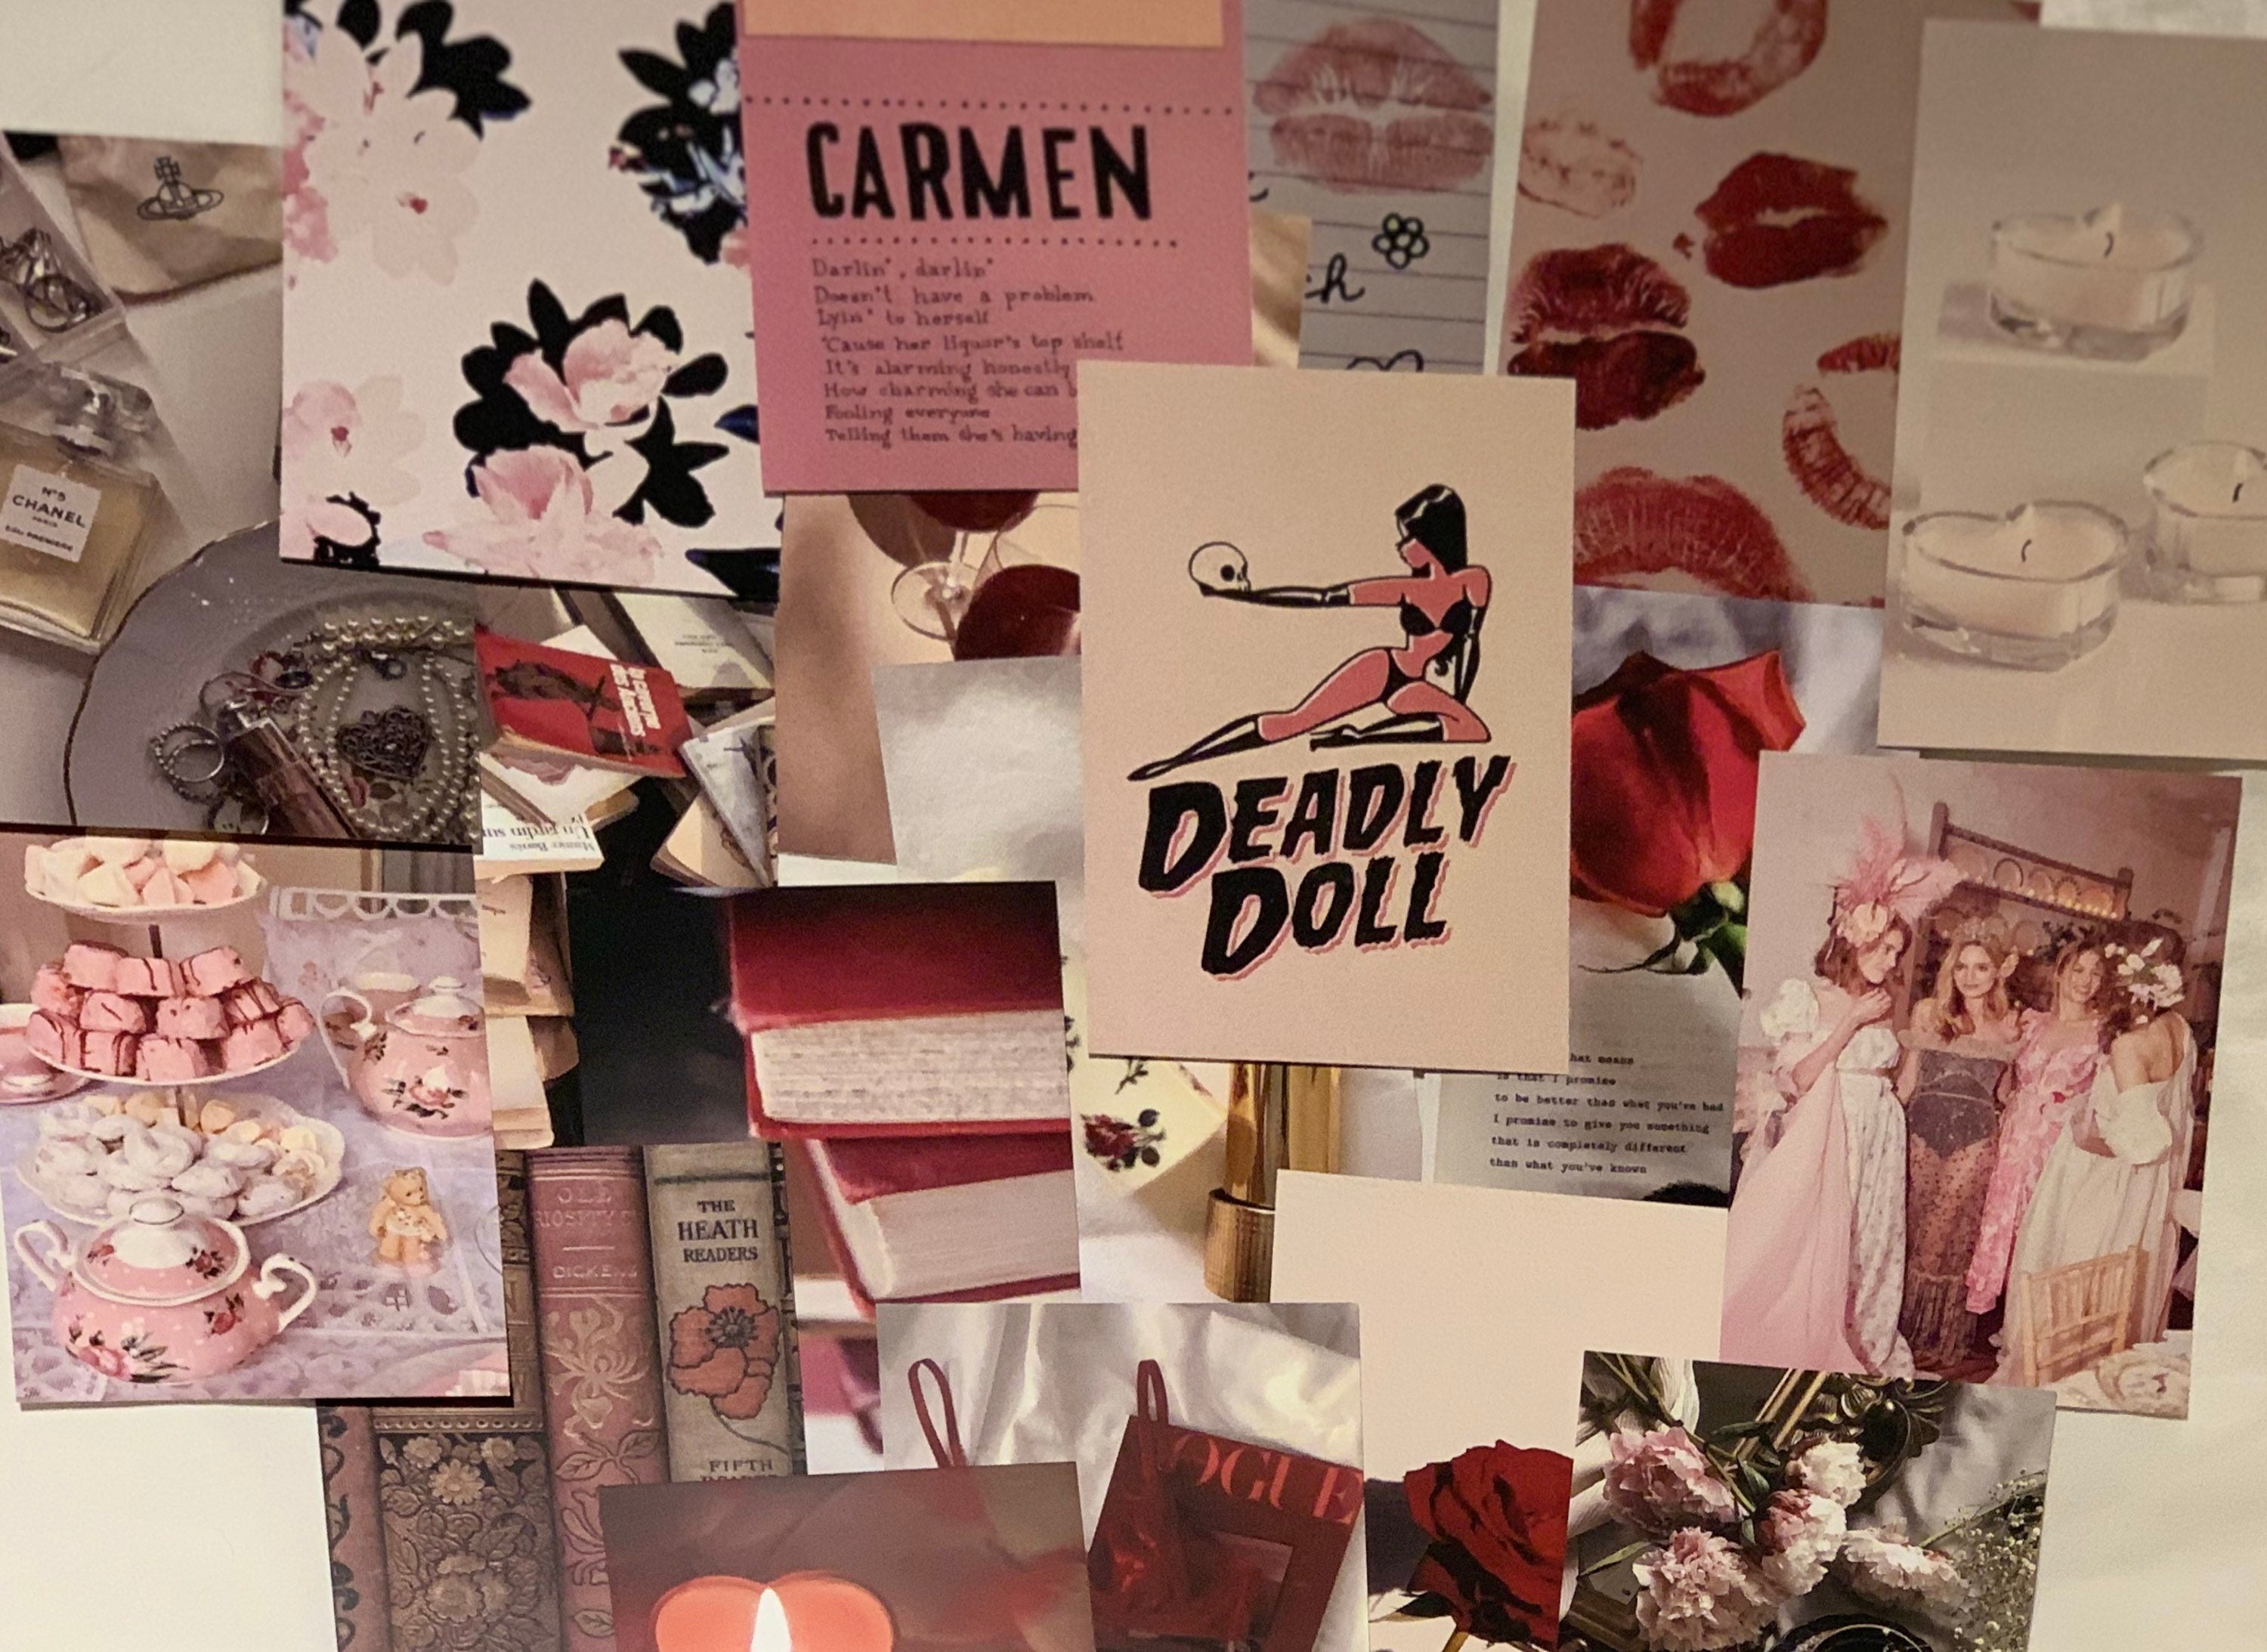 Collage of photos and images related to the opera Carmen, including a pink and red theme. - Coquette